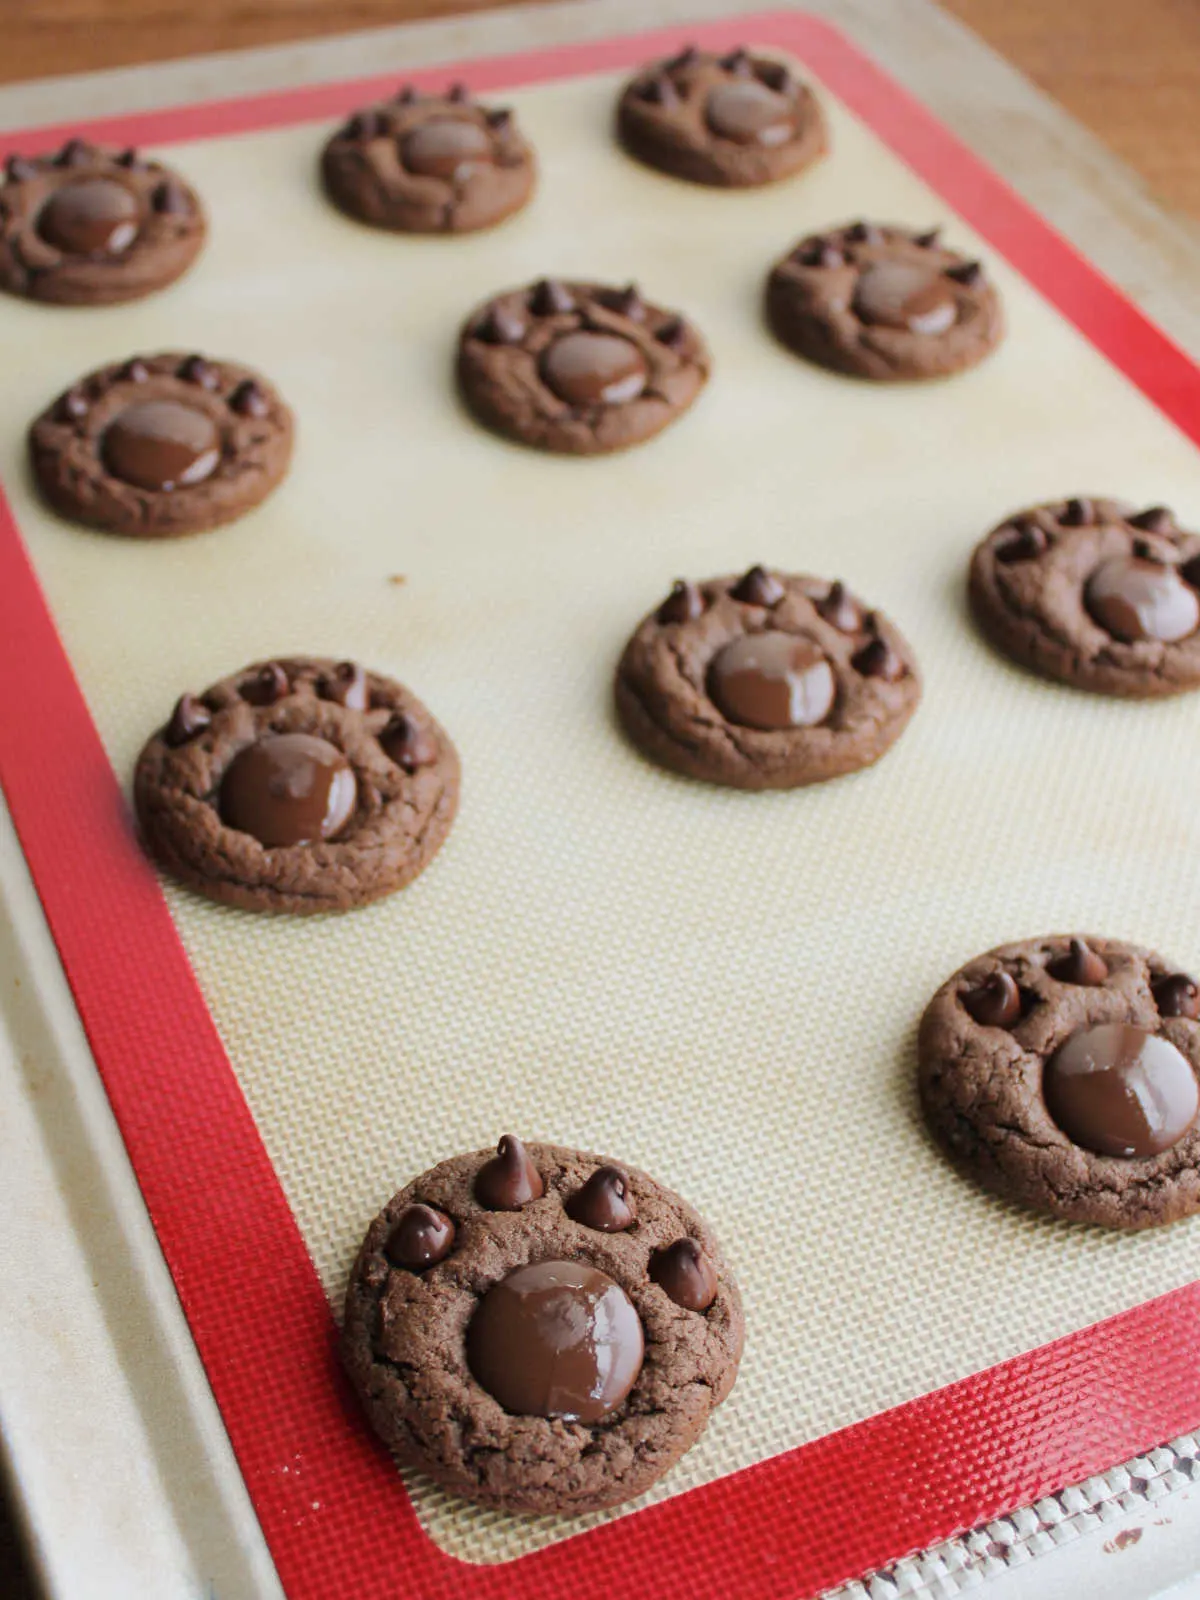 Cookies with four chocolate chips pressed in to make the toes for the paw prints.